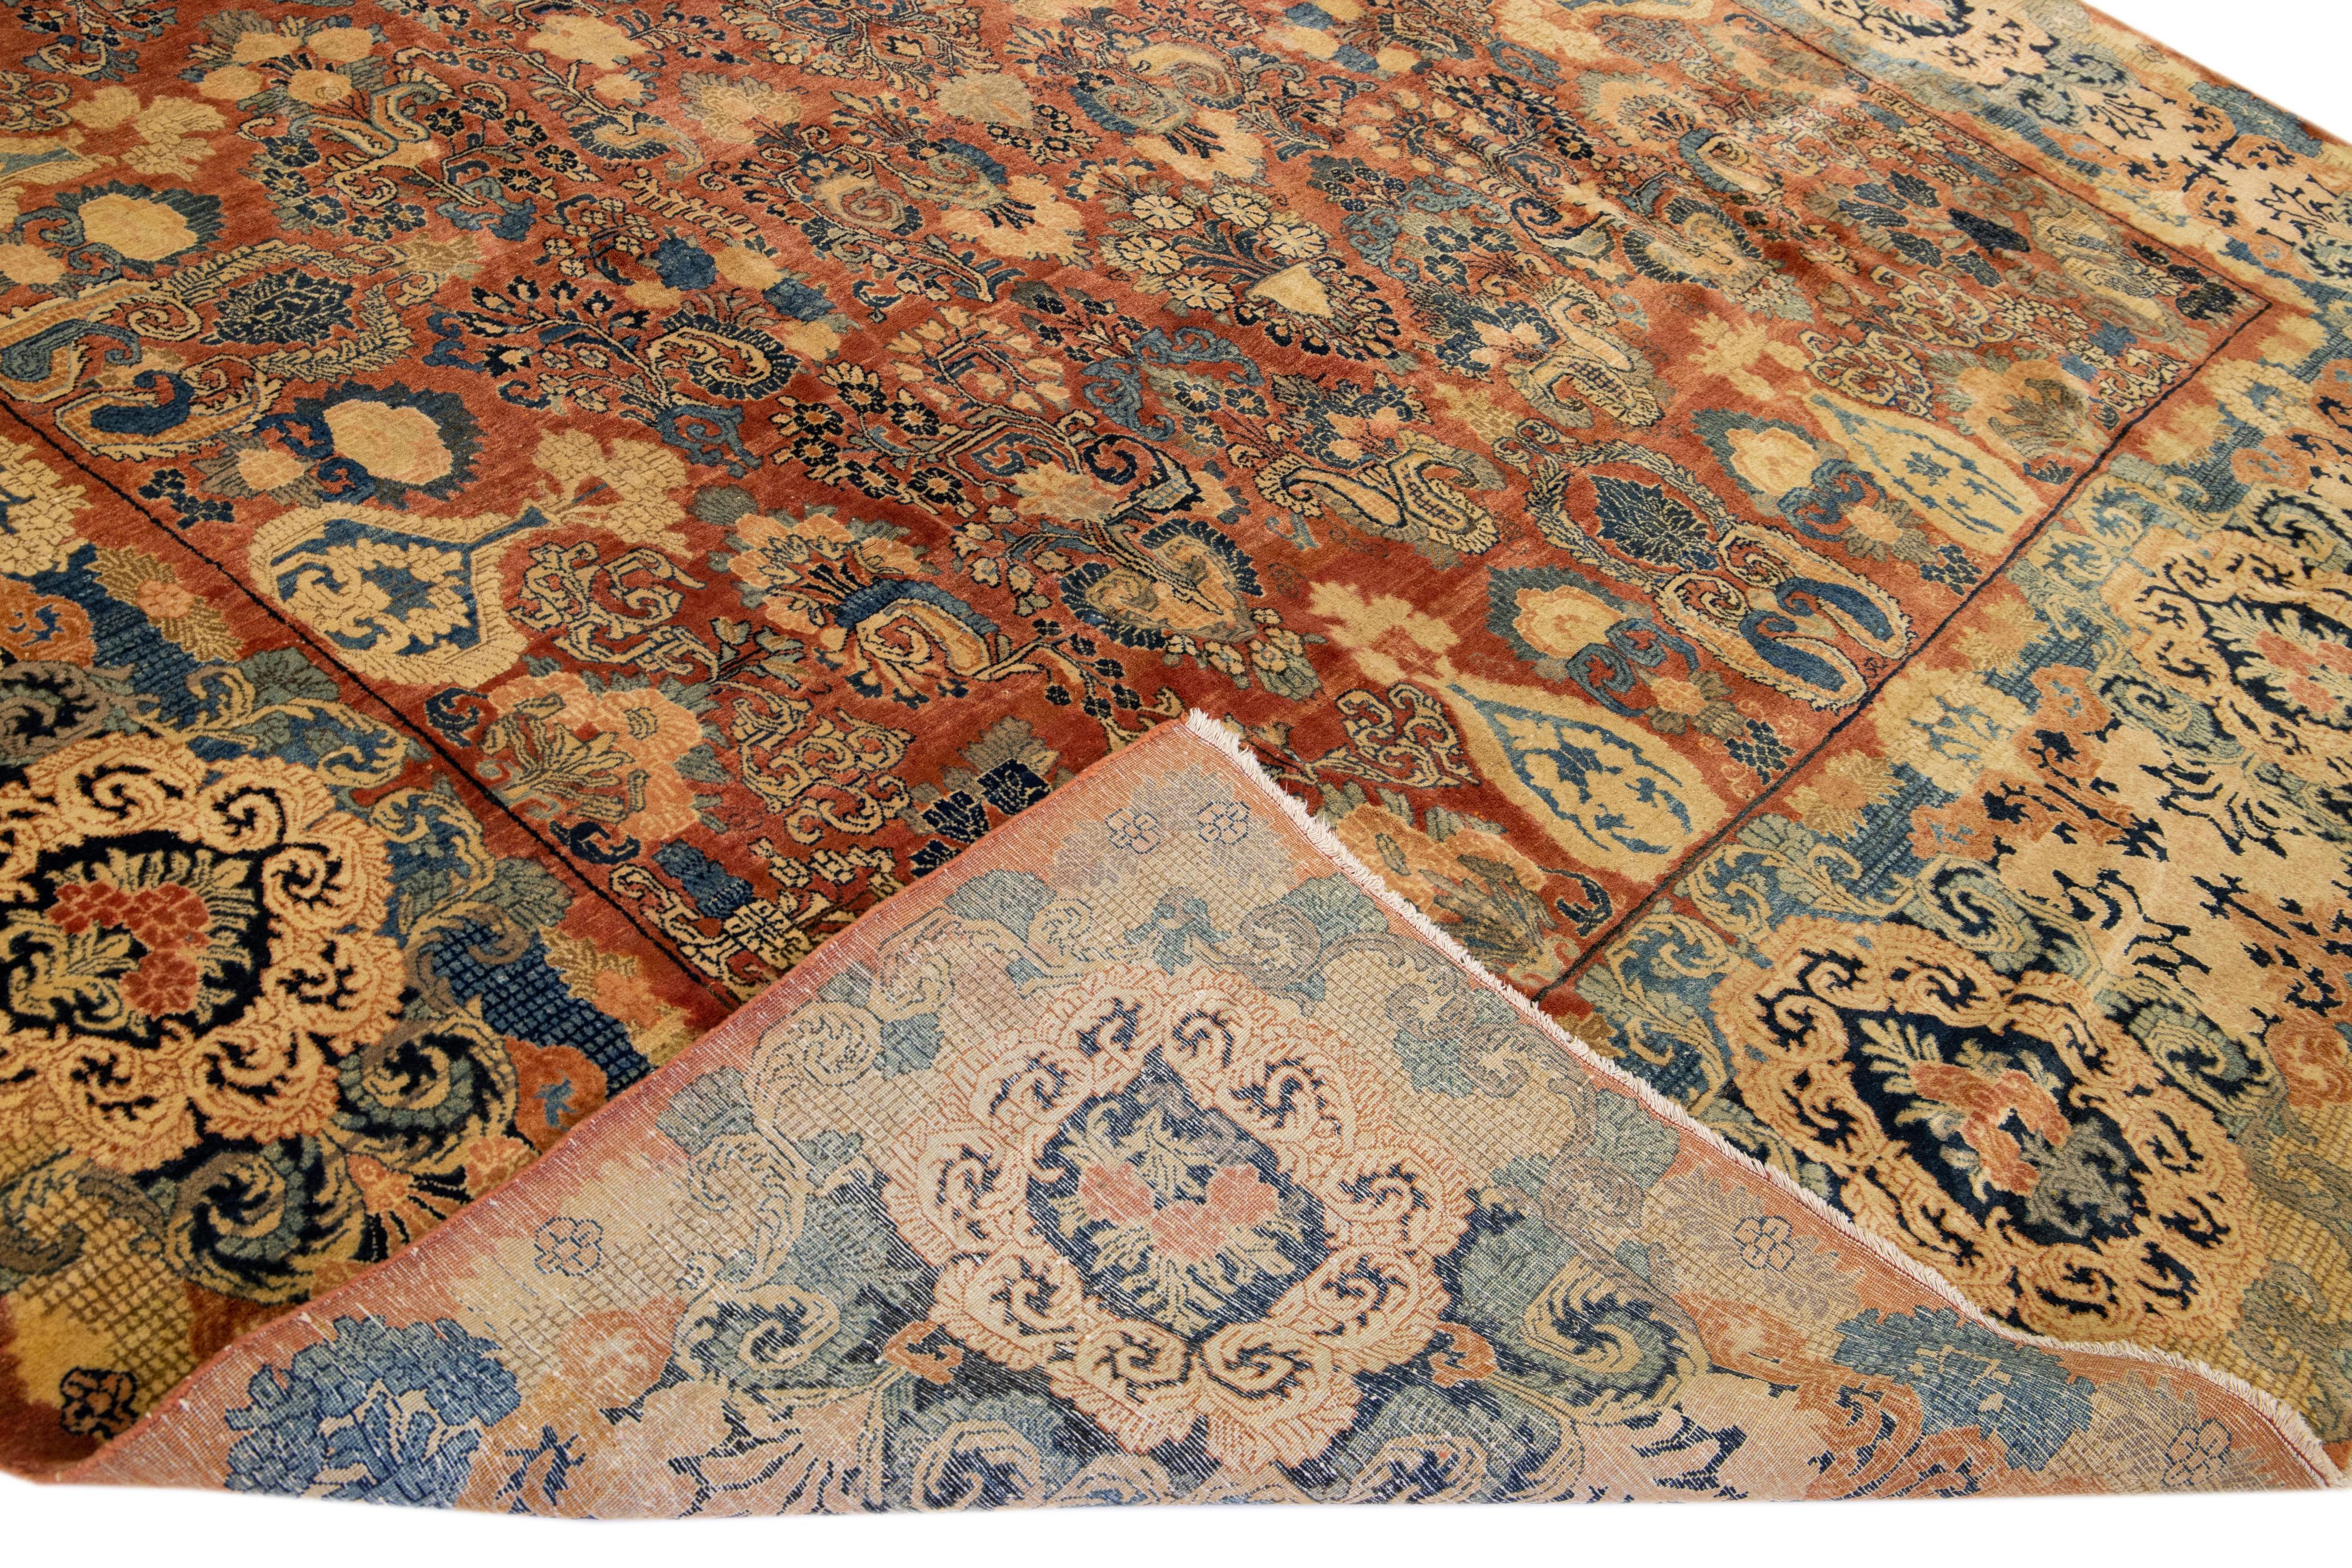 Beautiful Antique Farahan hand-knotted wool rug with an orange field. This Persian rug has a designed frame with multi-color accents on a Classic floral design.

This rug measure: 12' x 19'2